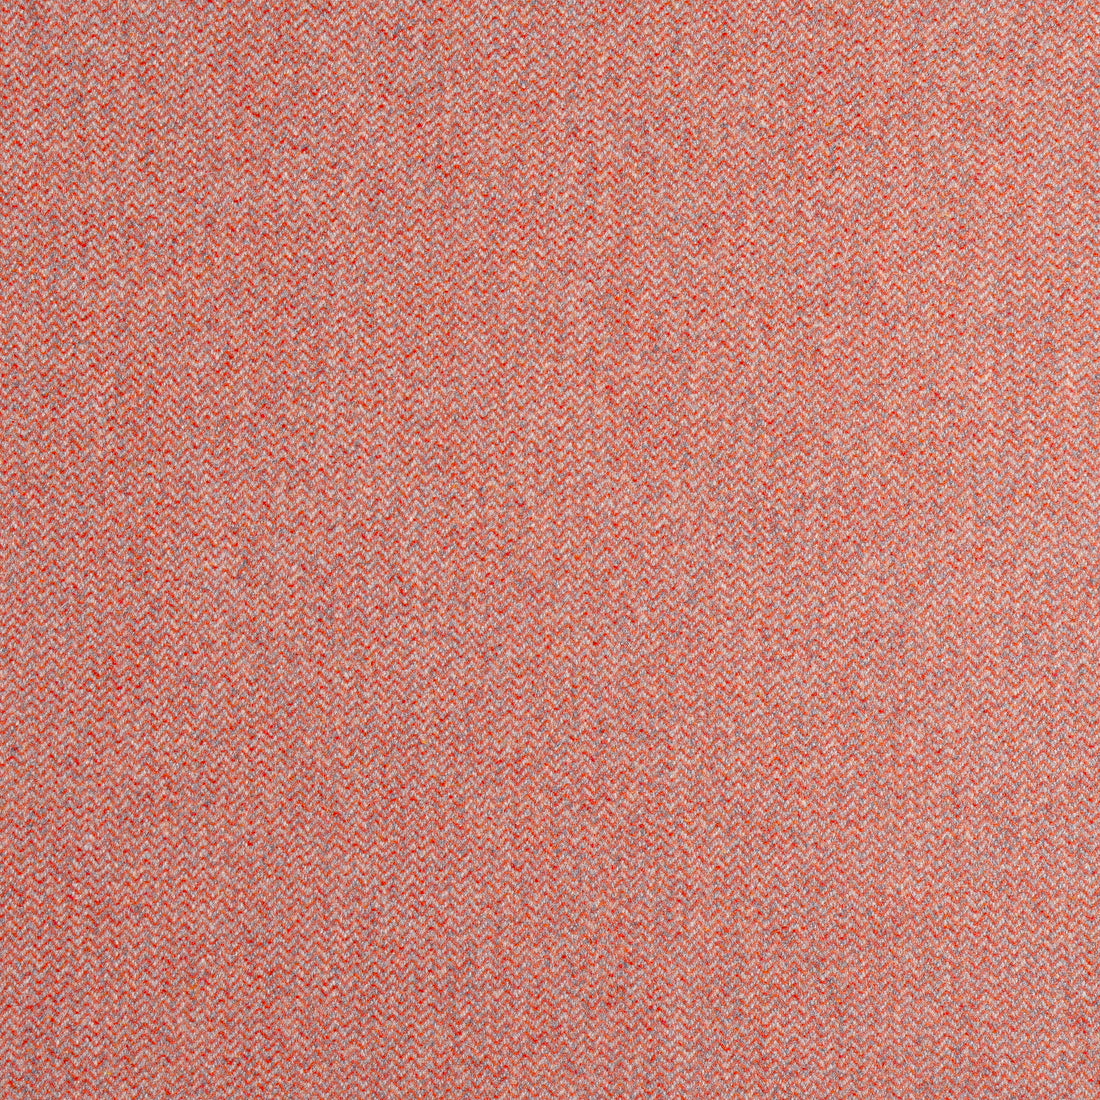 Dorset fabric in adobe color - pattern number W80904 - by Thibaut in the Dunmore collection